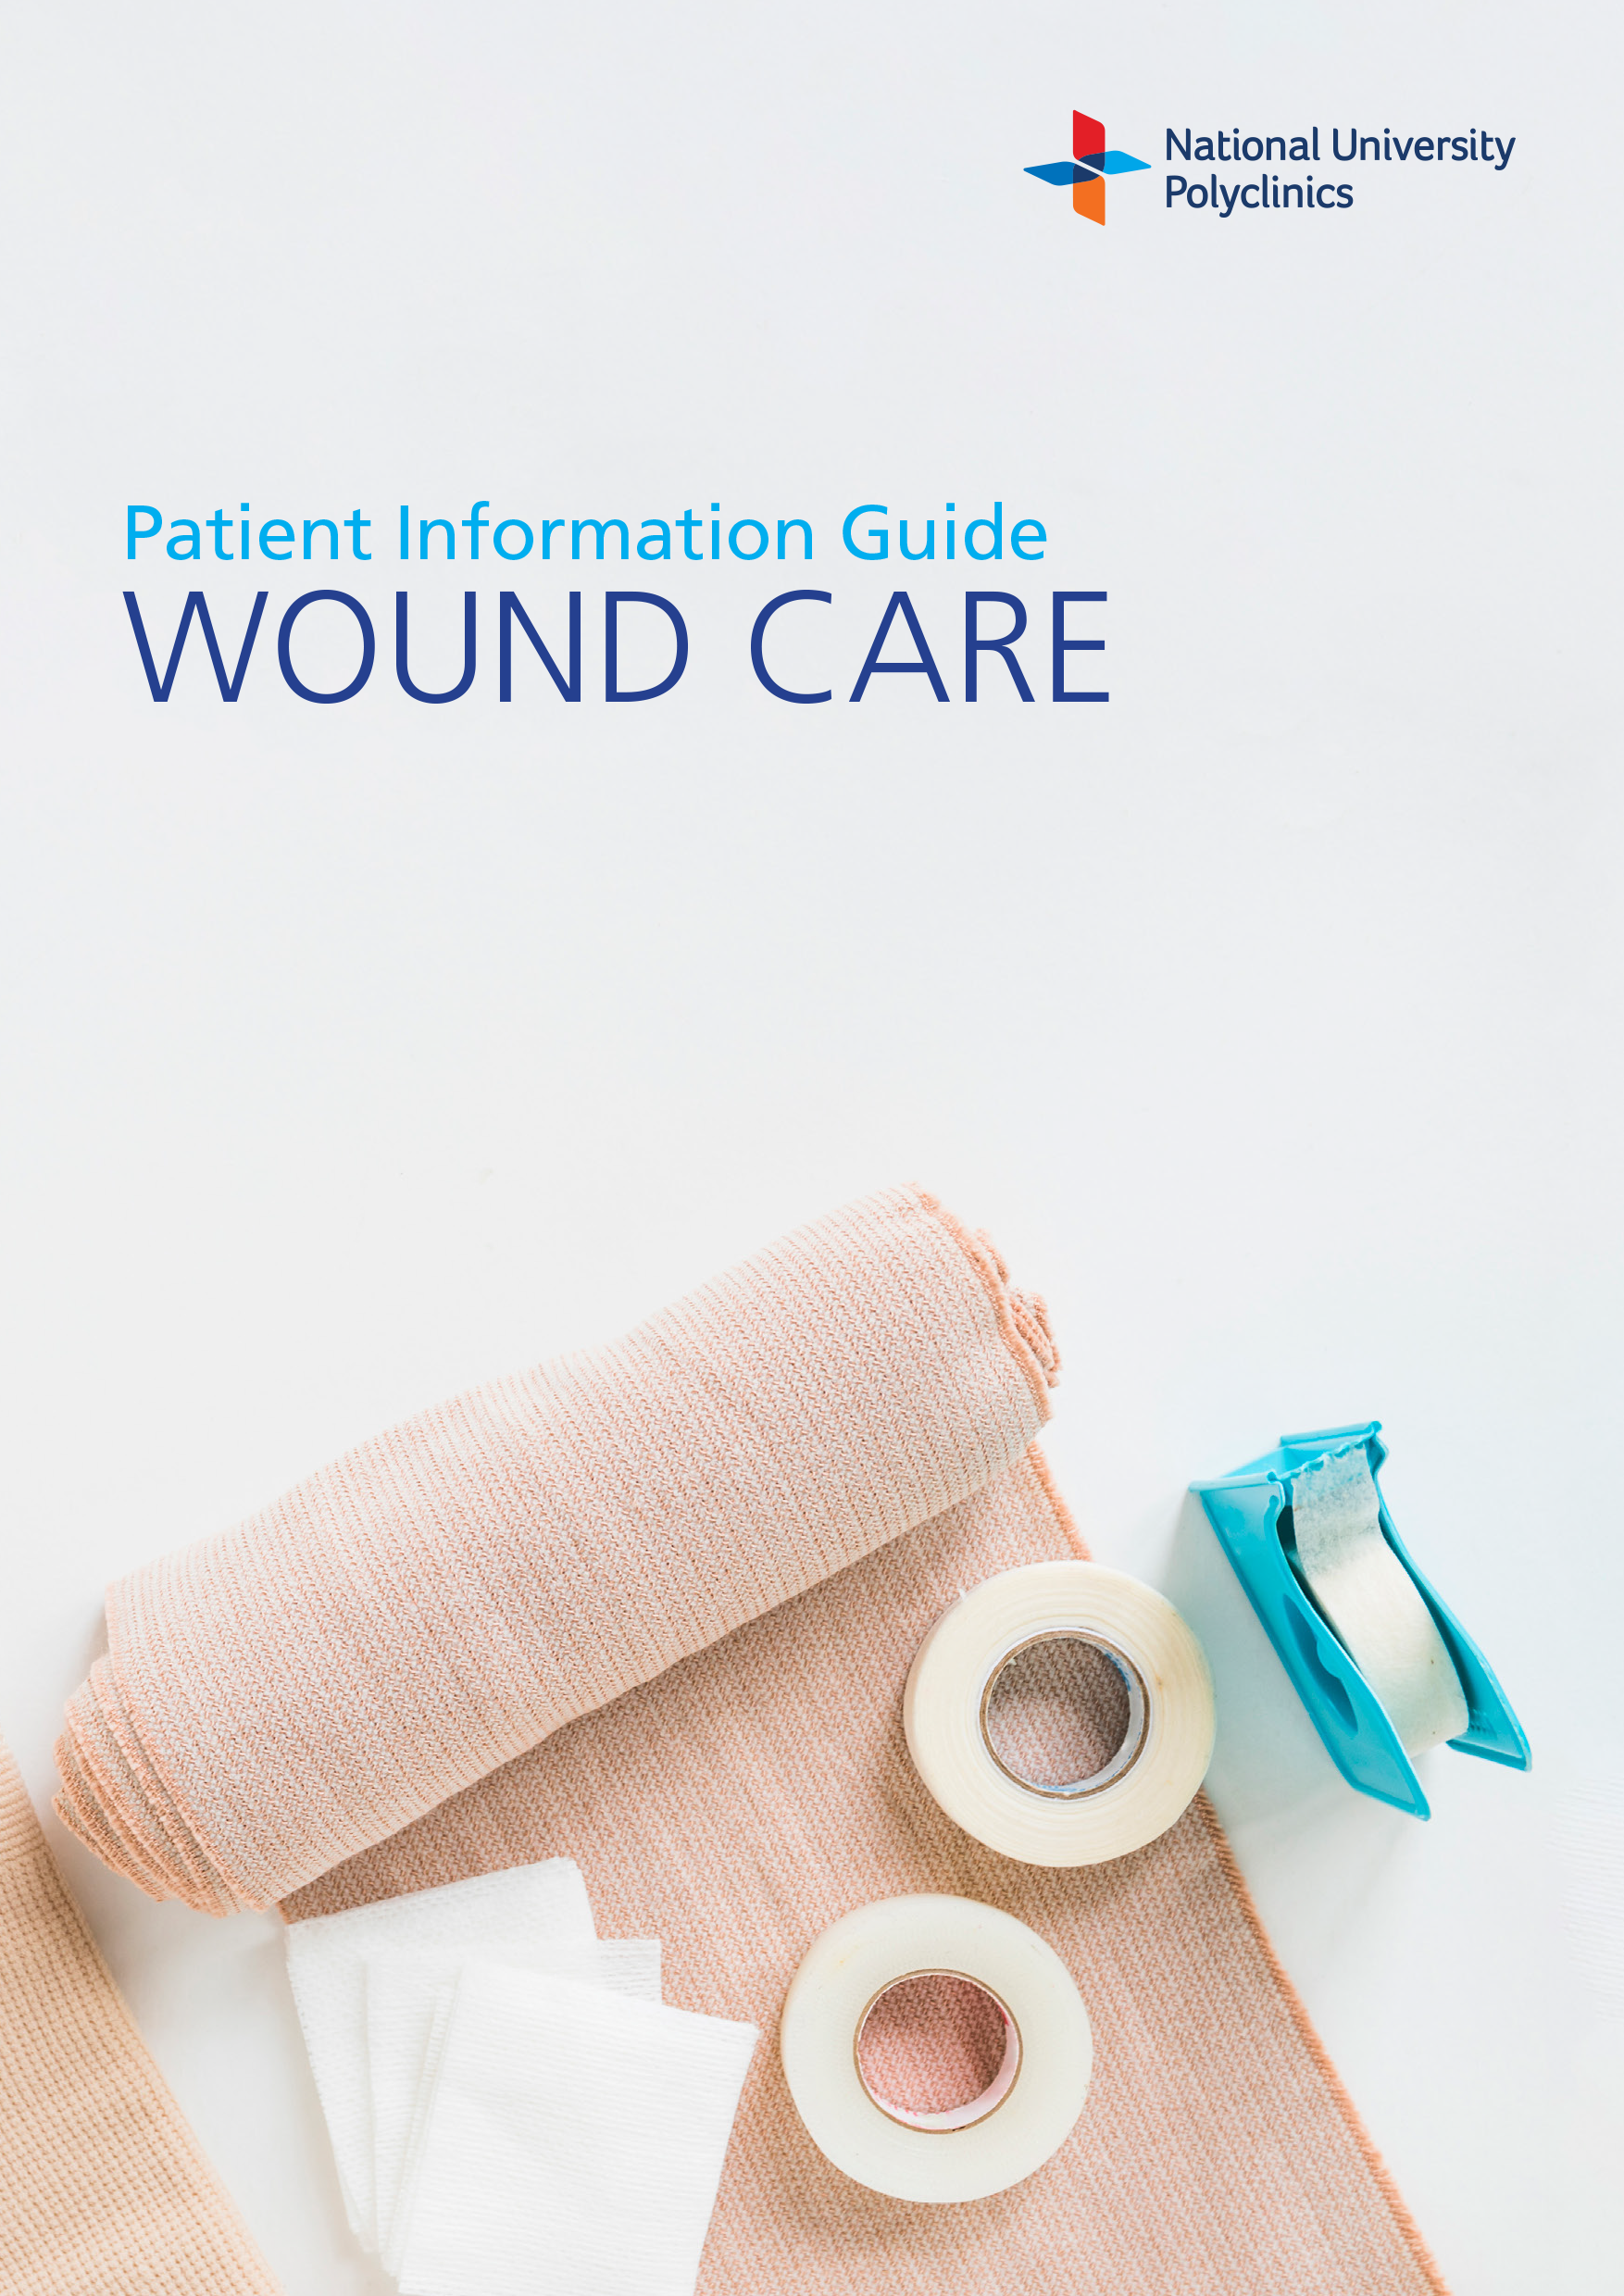 2-Wound Care (English)